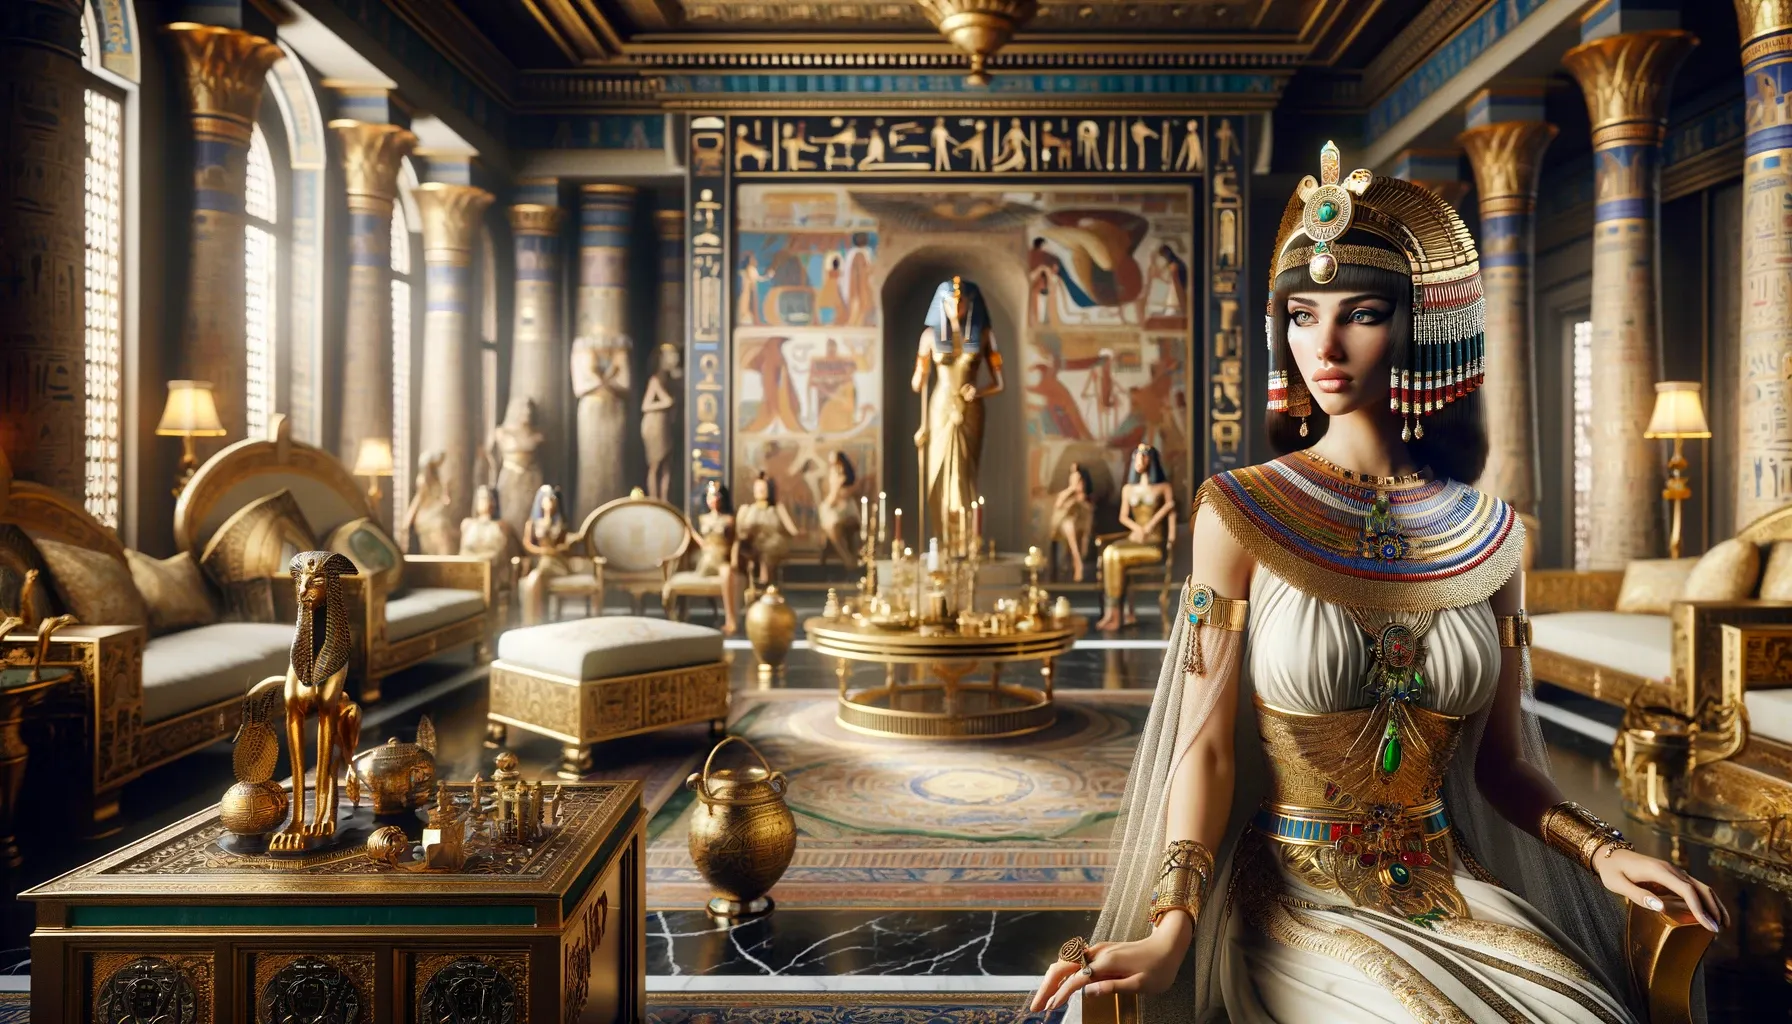 A possible representation of Cleopatra at her palace